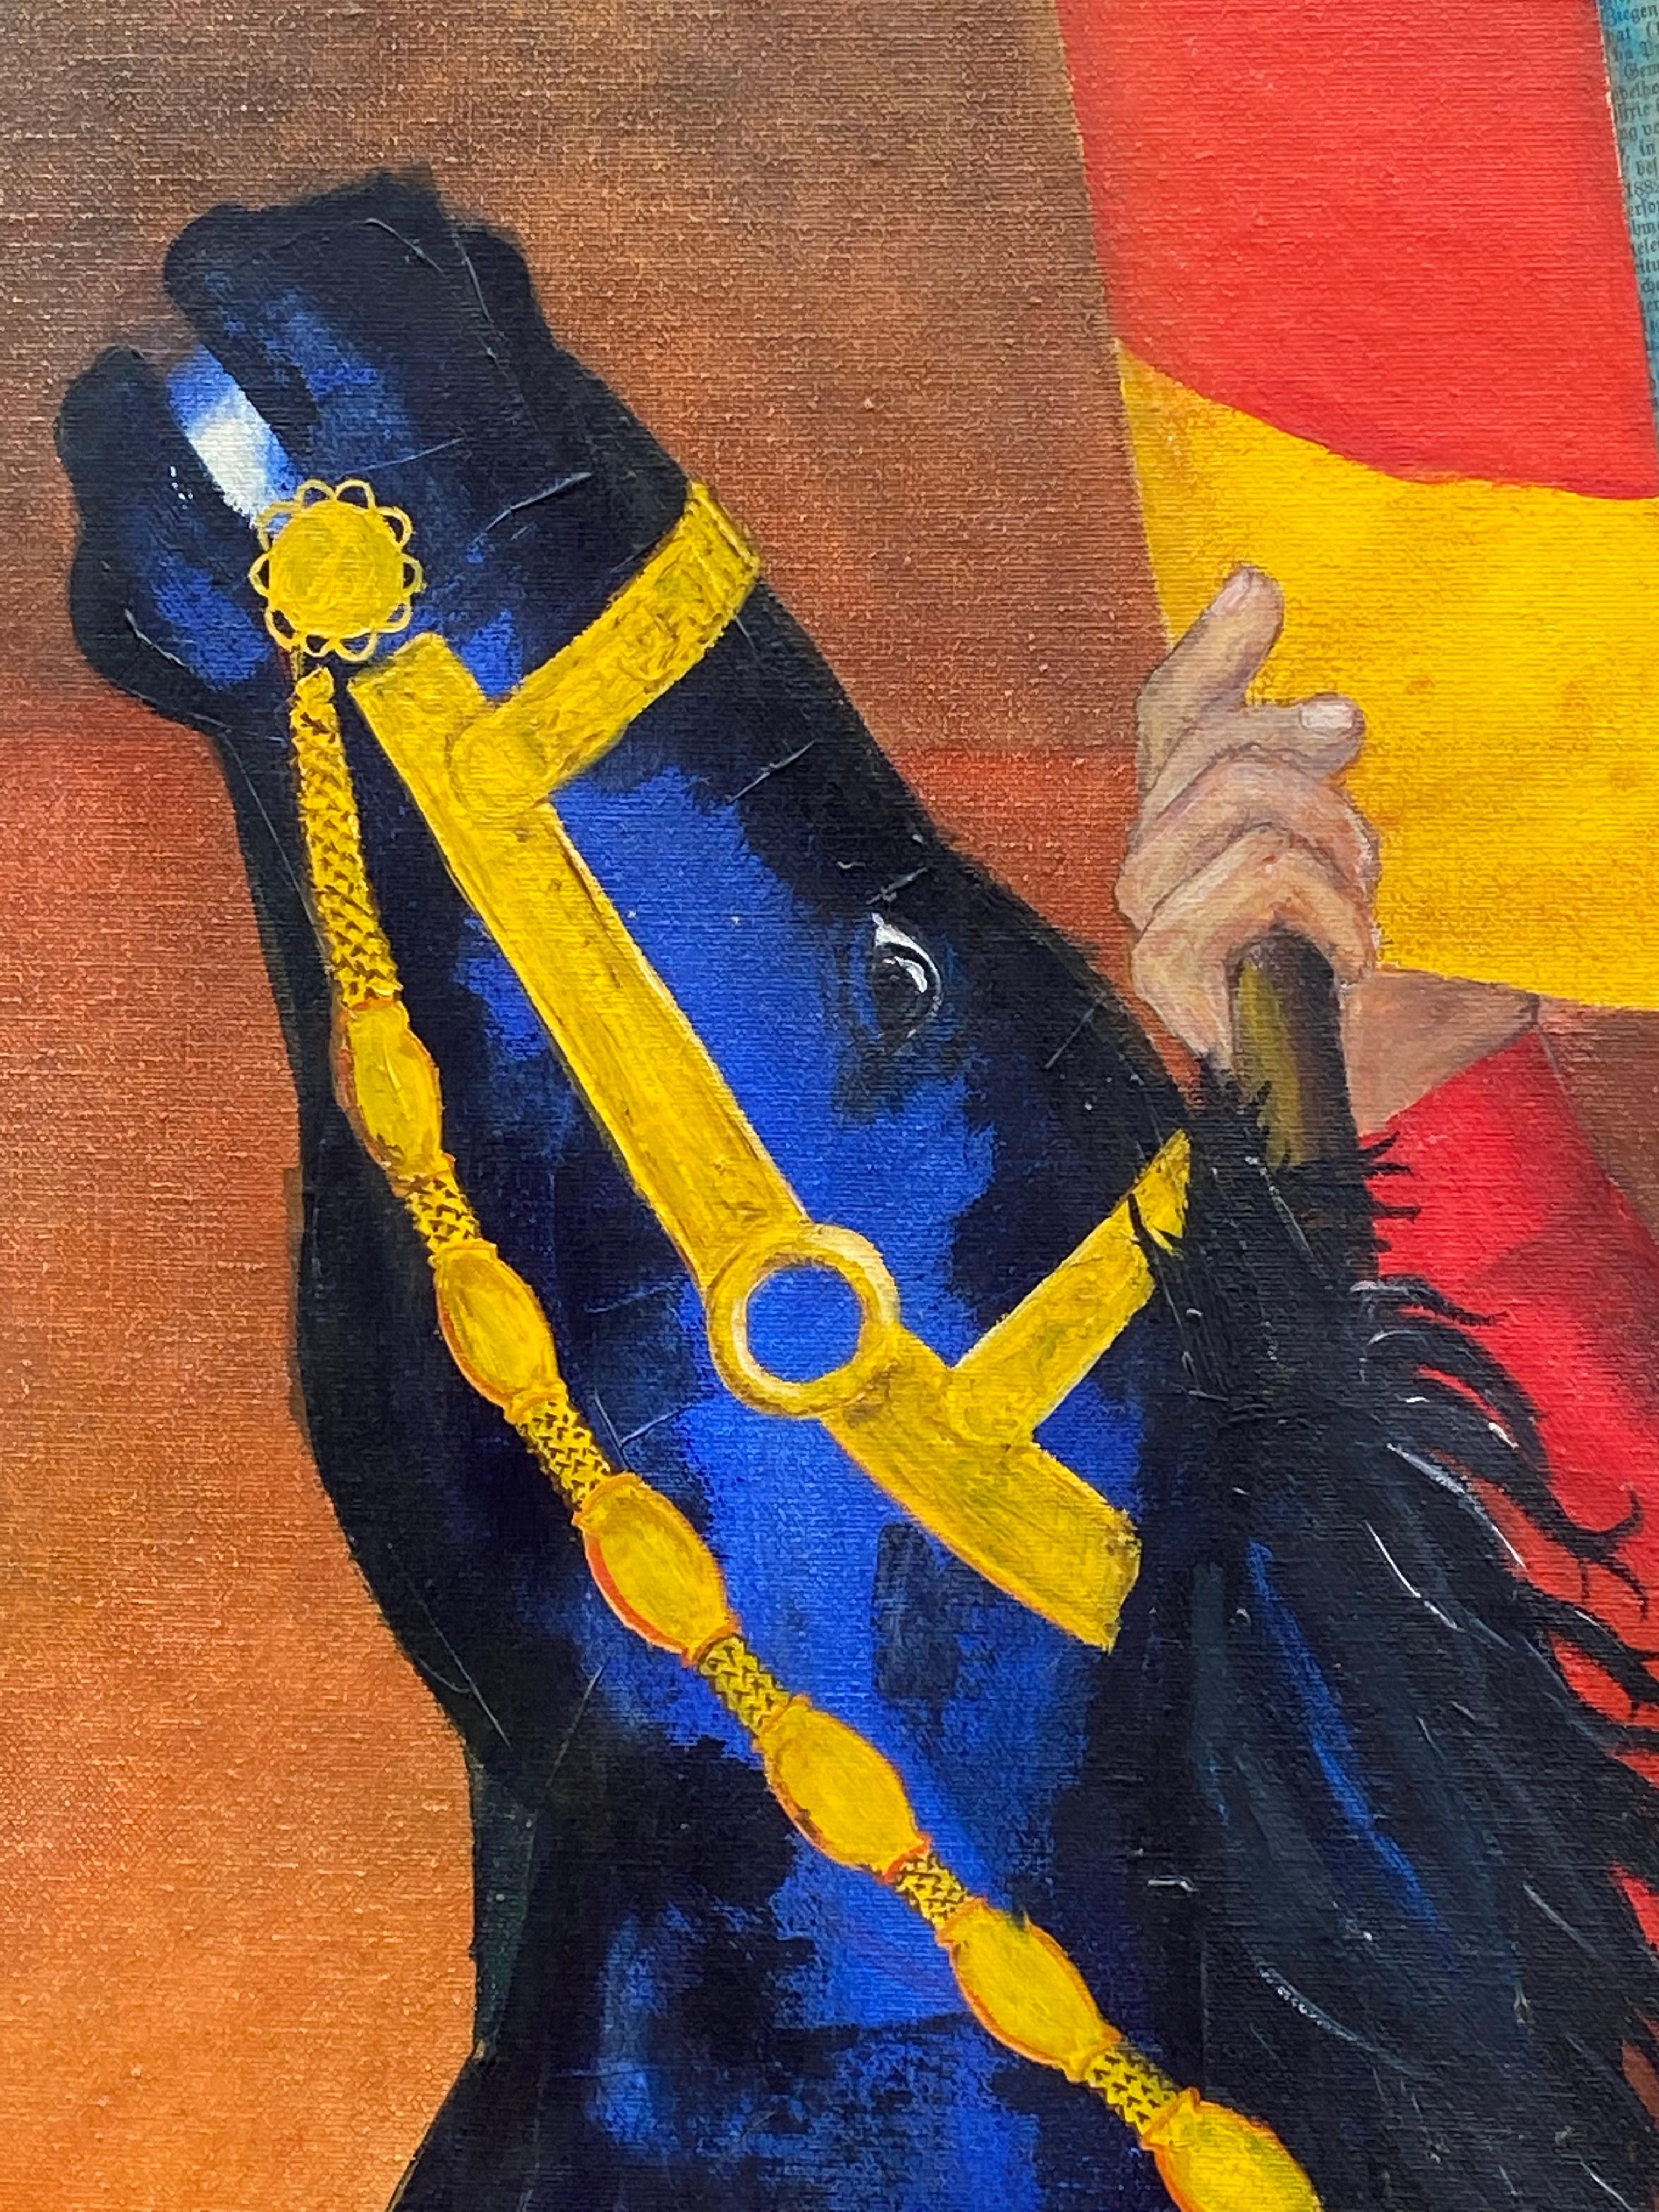 “Knight and Blue Horse” - Black Figurative Painting by Glauco Pinto de Moraes